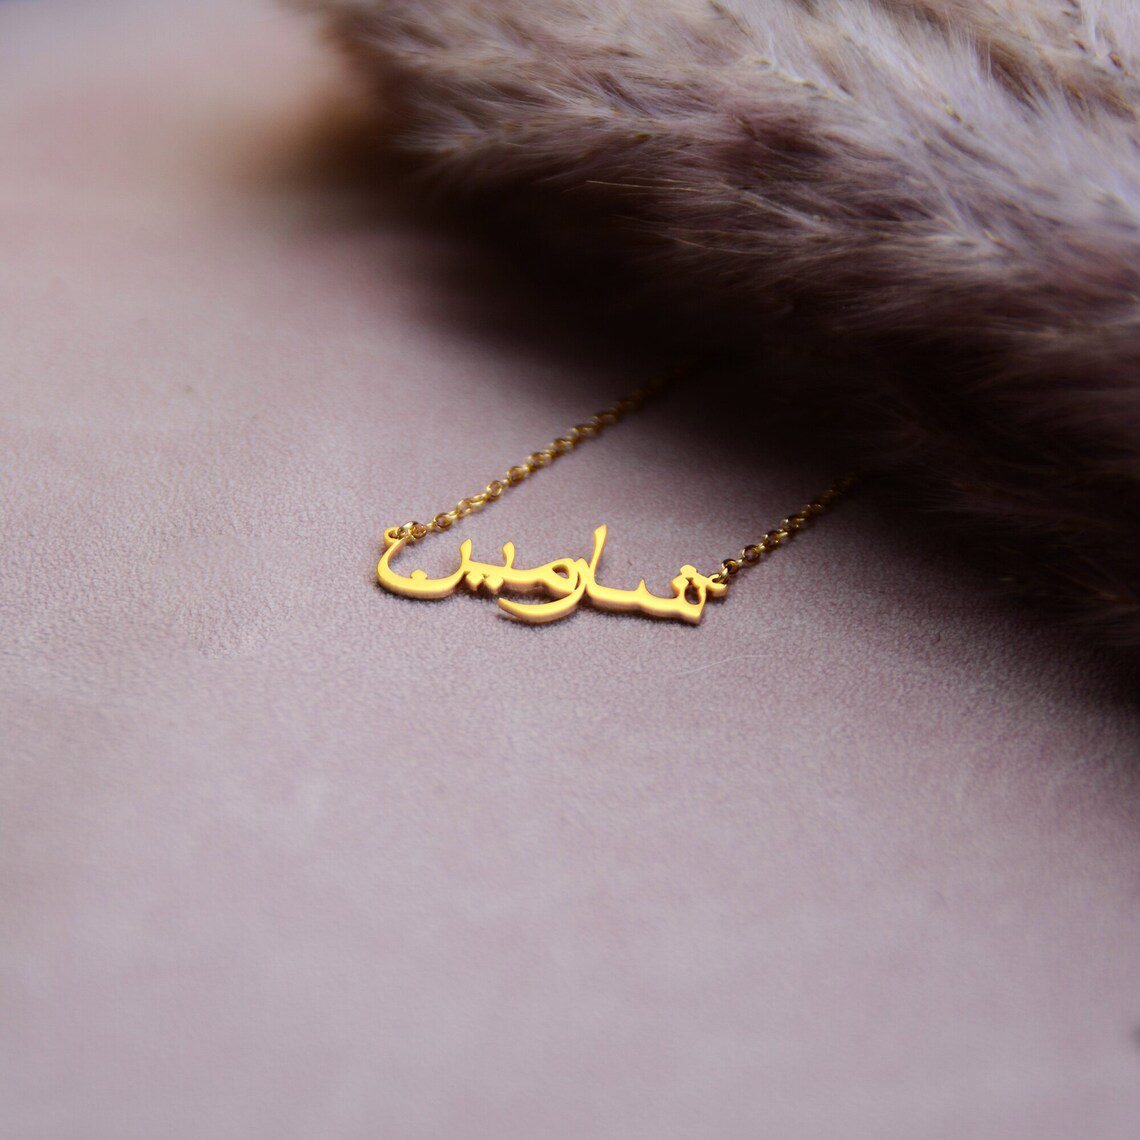 Arabic Name Necklace - Gold Arabic Name Necklace - Personalized Arabic  Necklace - Sterling Silver Name Necklace - Christmas Gift -